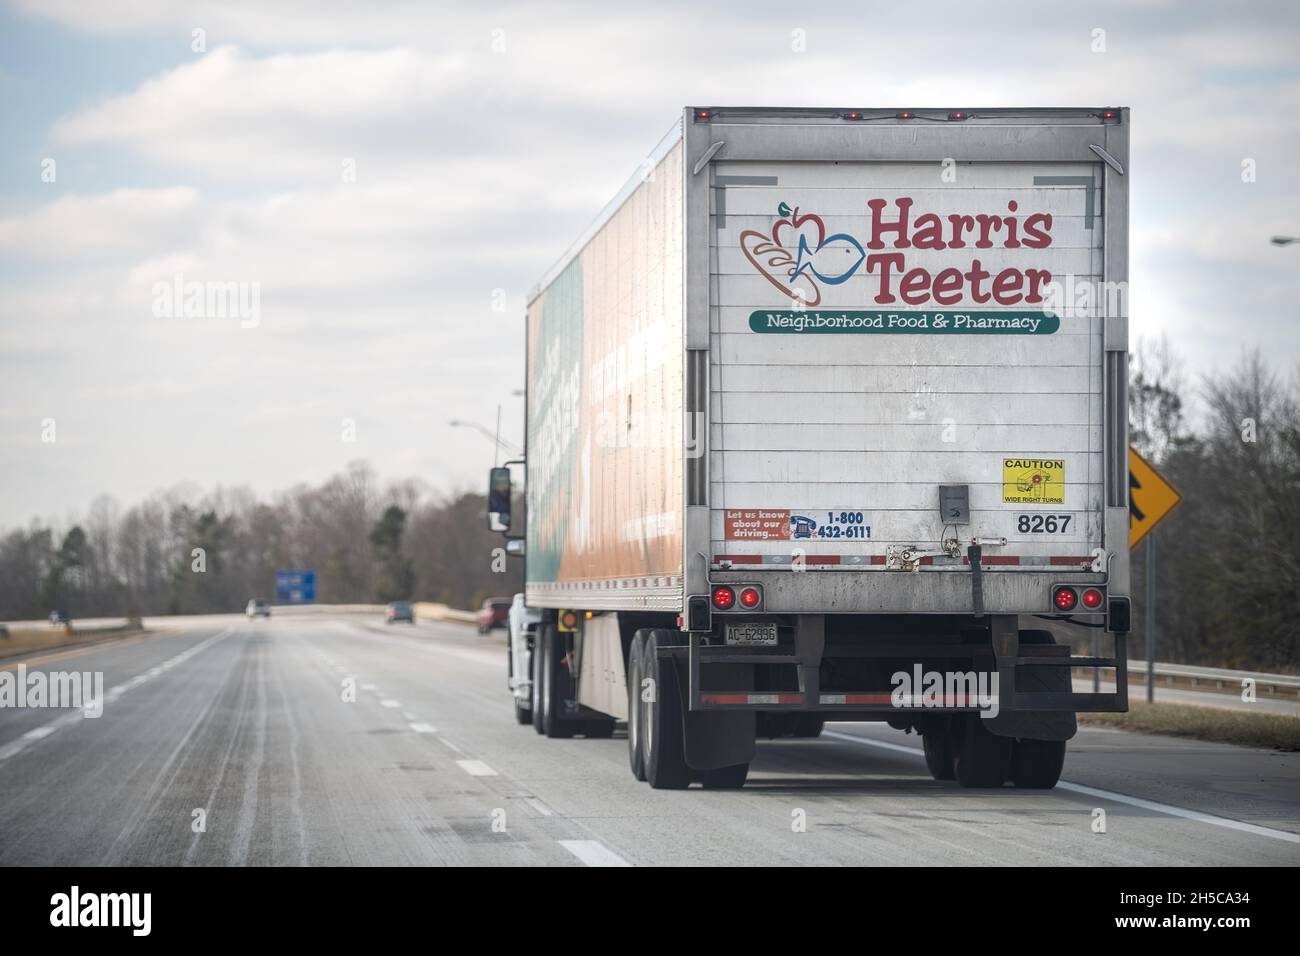 Greensboro, USA - January 7, 2021: Highway traffic interstate 85 road in North Carolina and truck delivery vehicle for Harris Teeter driving Stock Photo